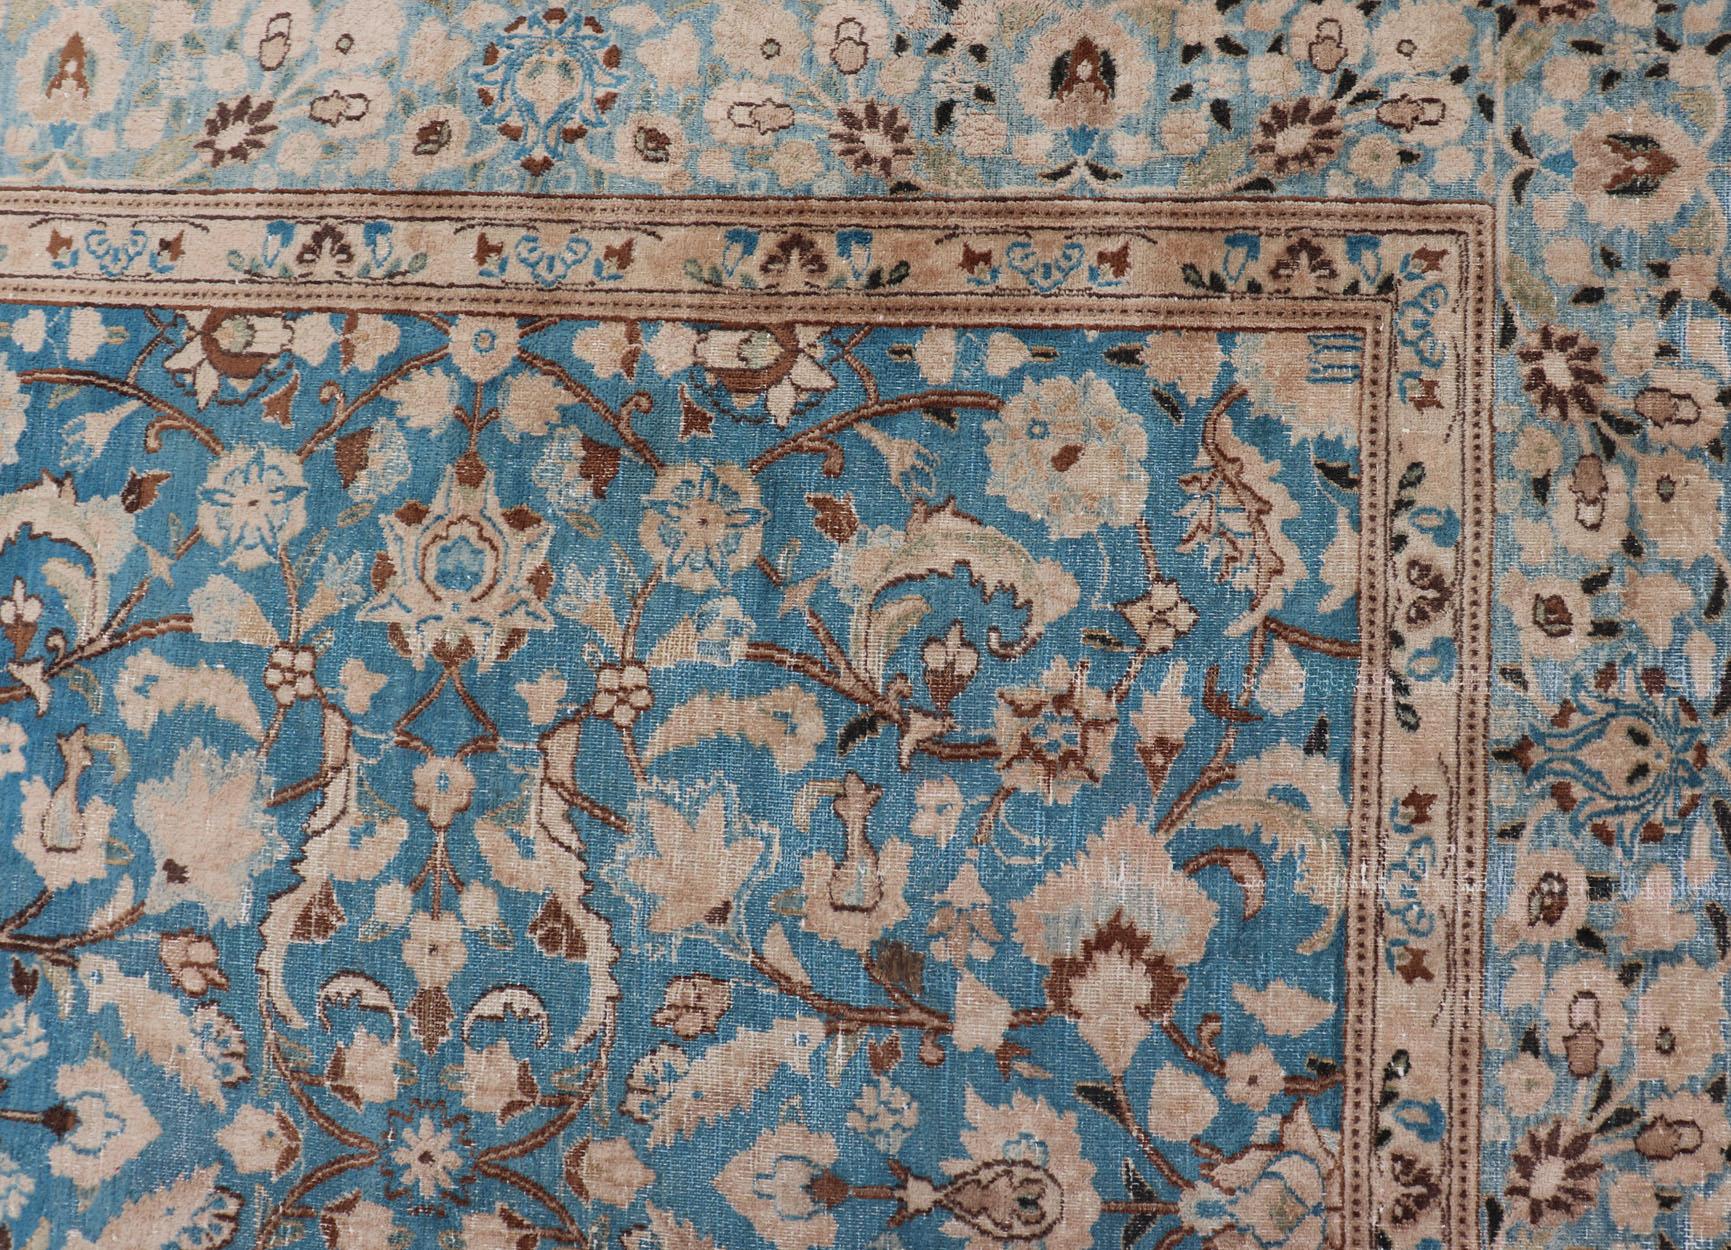 Turquoise Blue Background Antique Persian Khorassan Rug with Light Blue Border 9